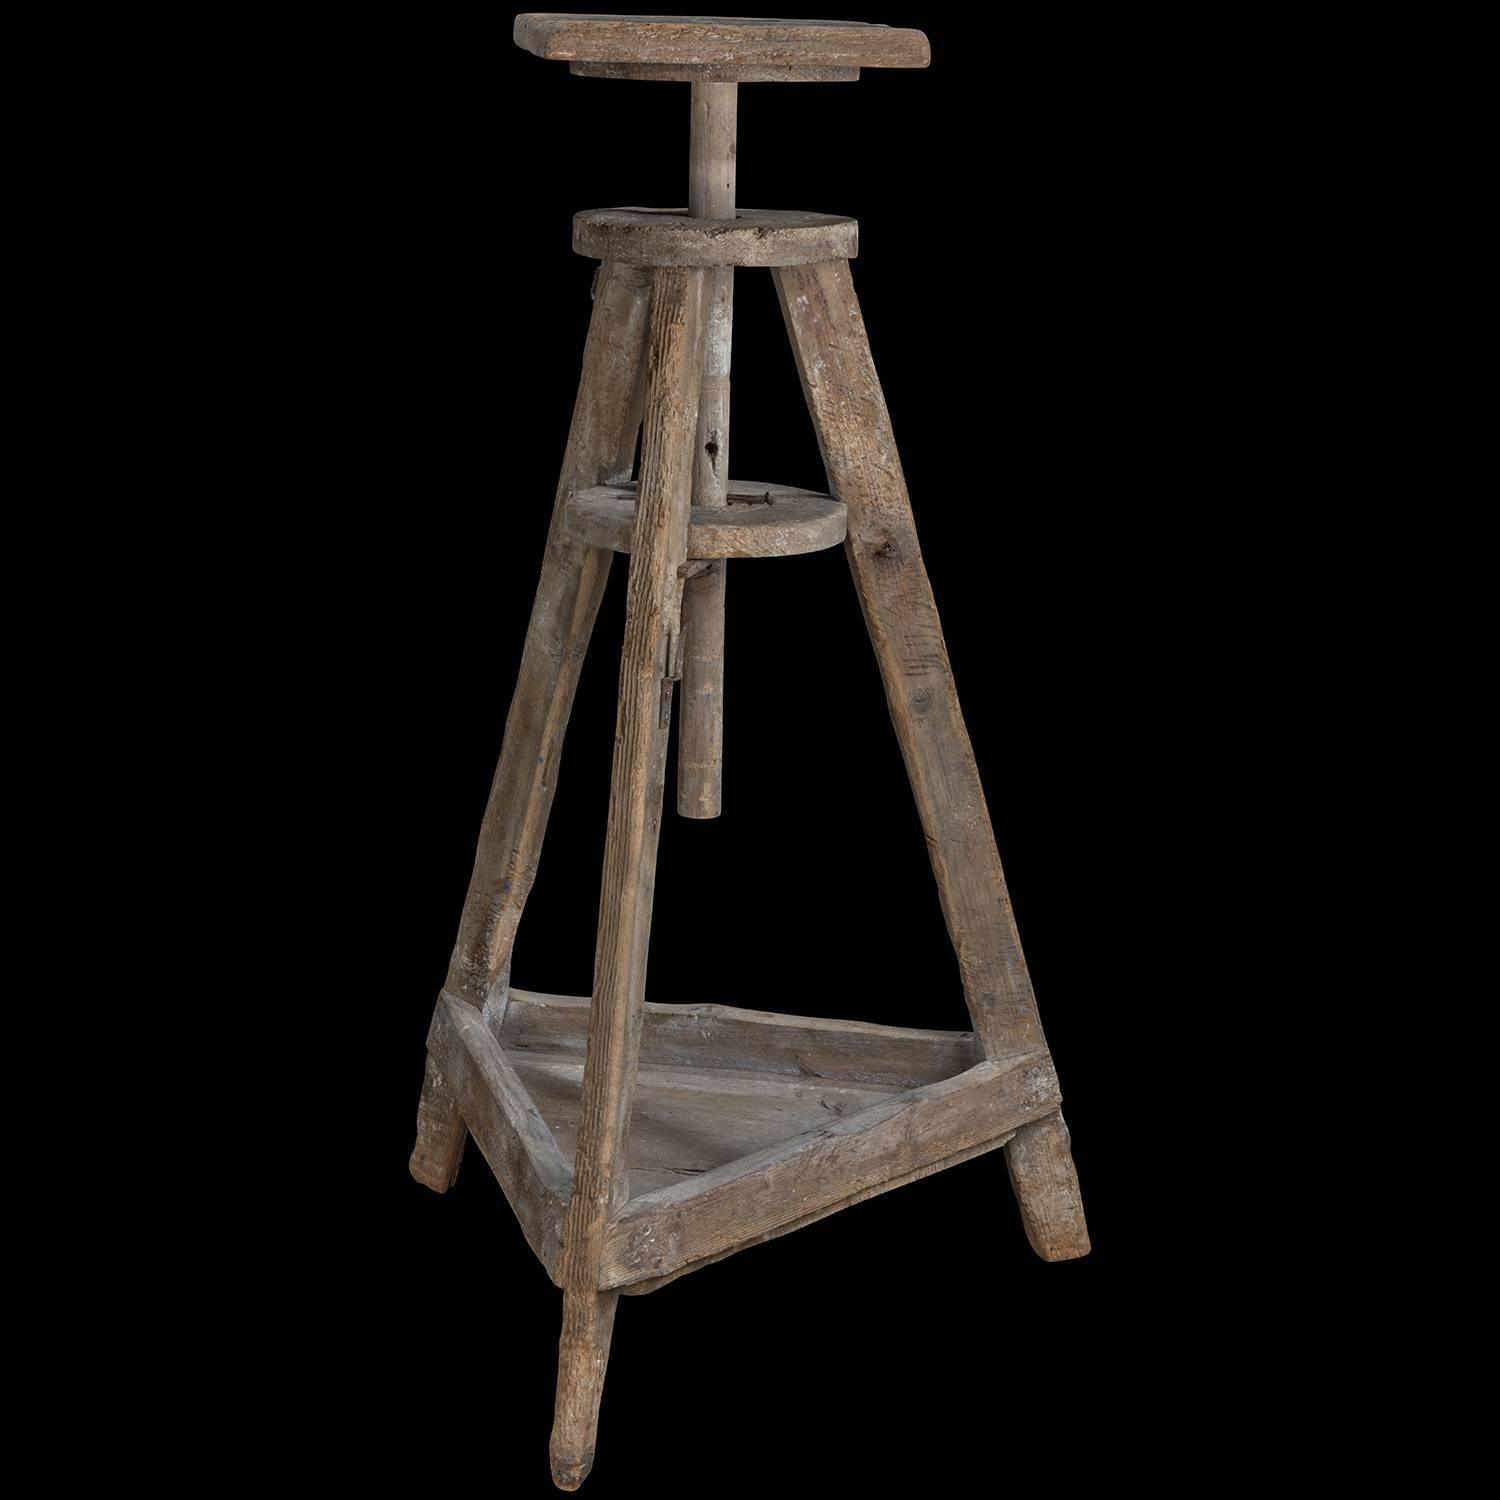 Hand-Crafted Primitive Sculpture Stand